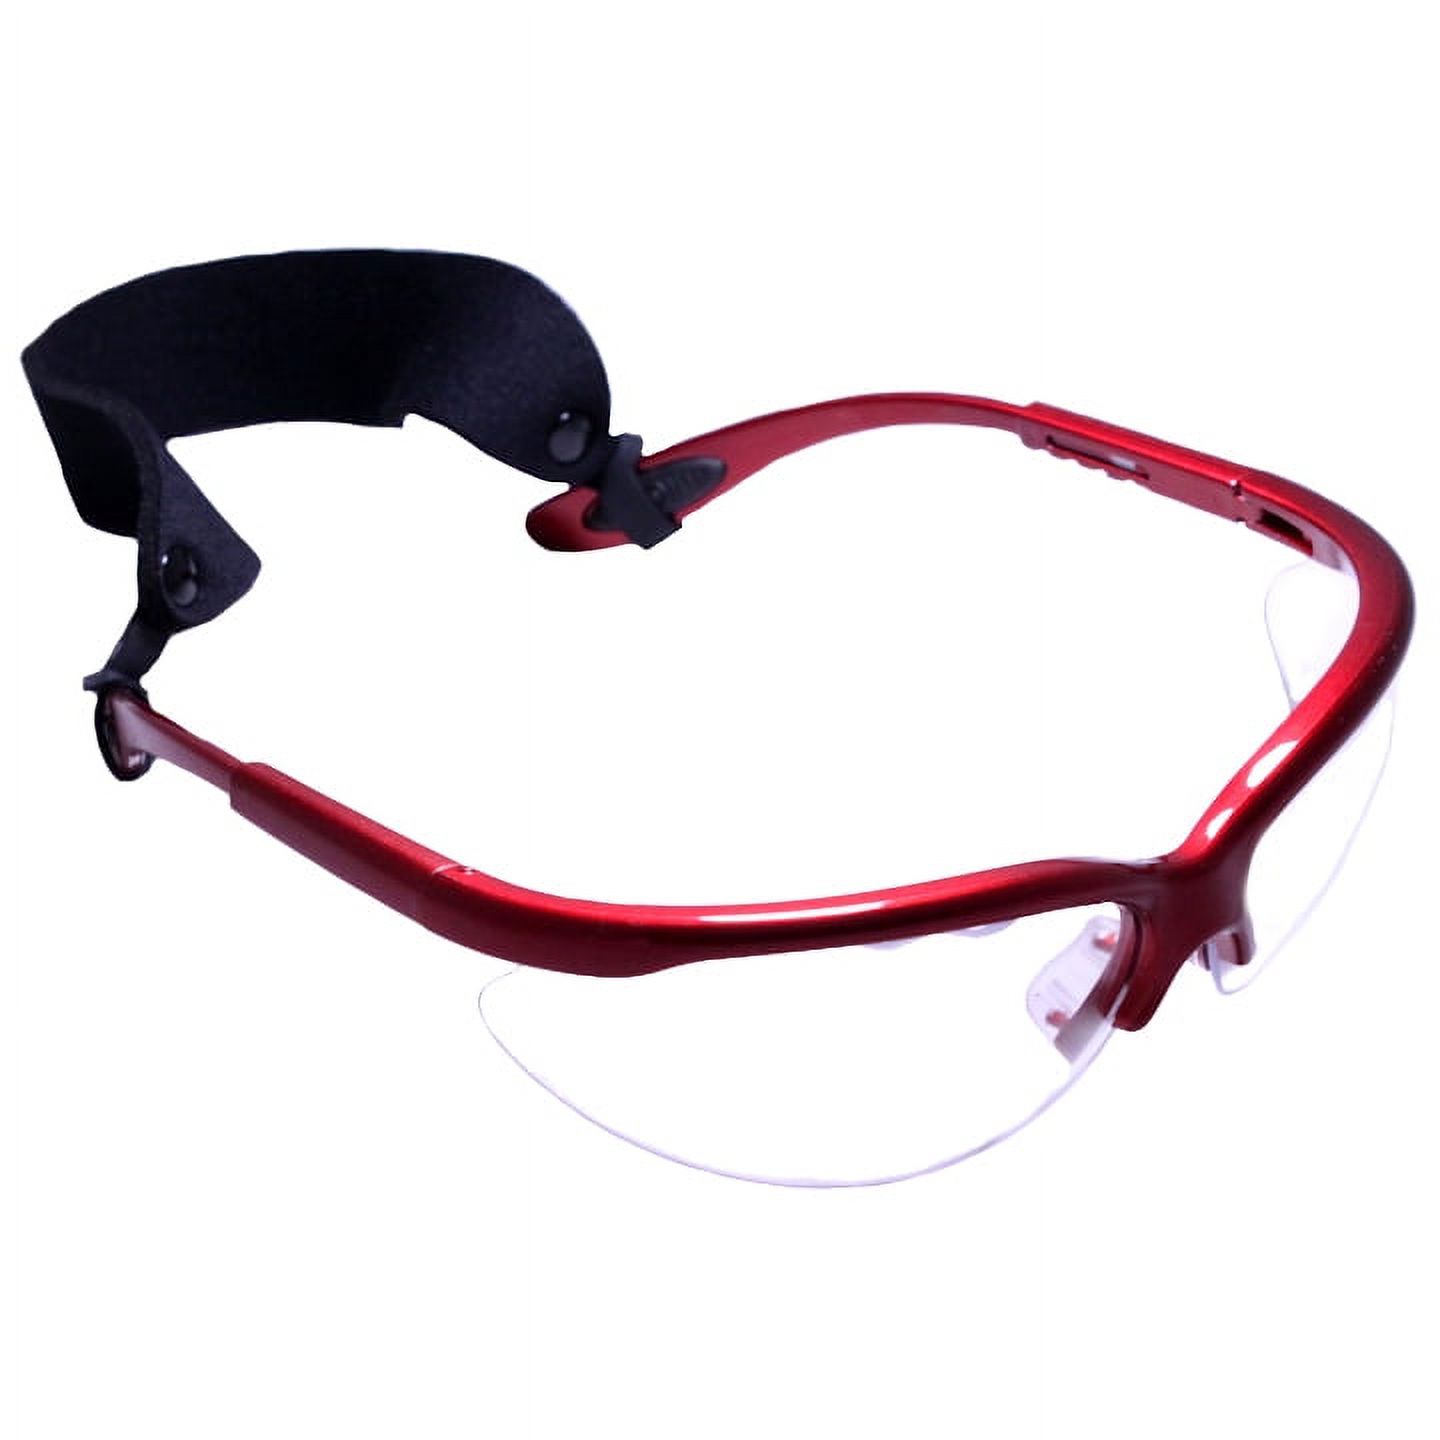 Python Xtreme View Protective Racquetball Eyeguard (Eyewear) (Red) - image 2 of 3